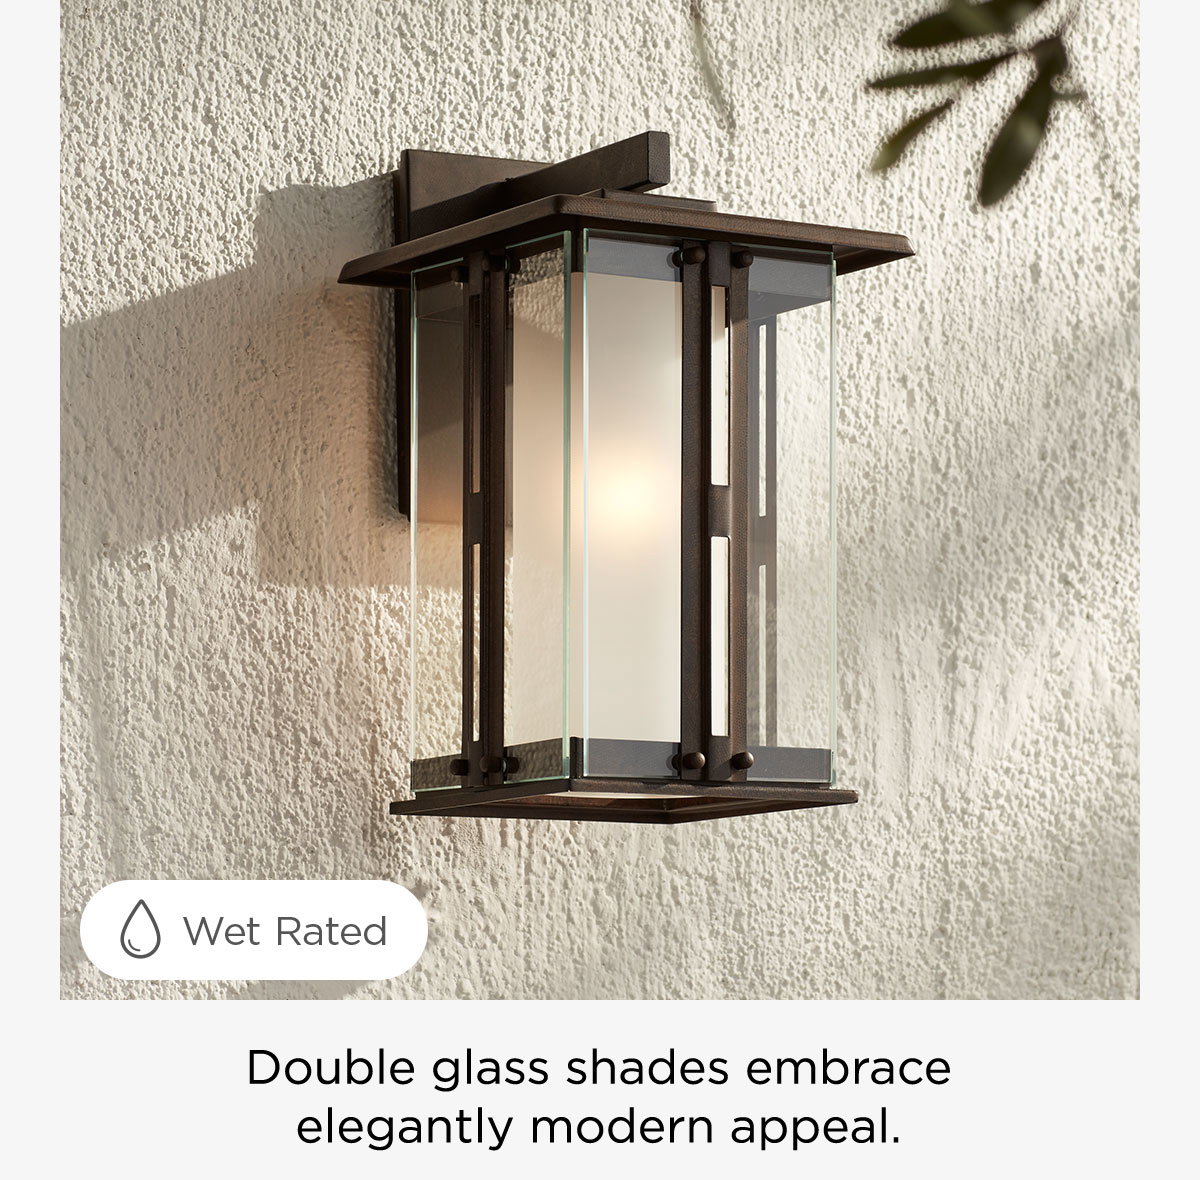 Wet Rated - Double glass shades embrace elegantly modern appeal.